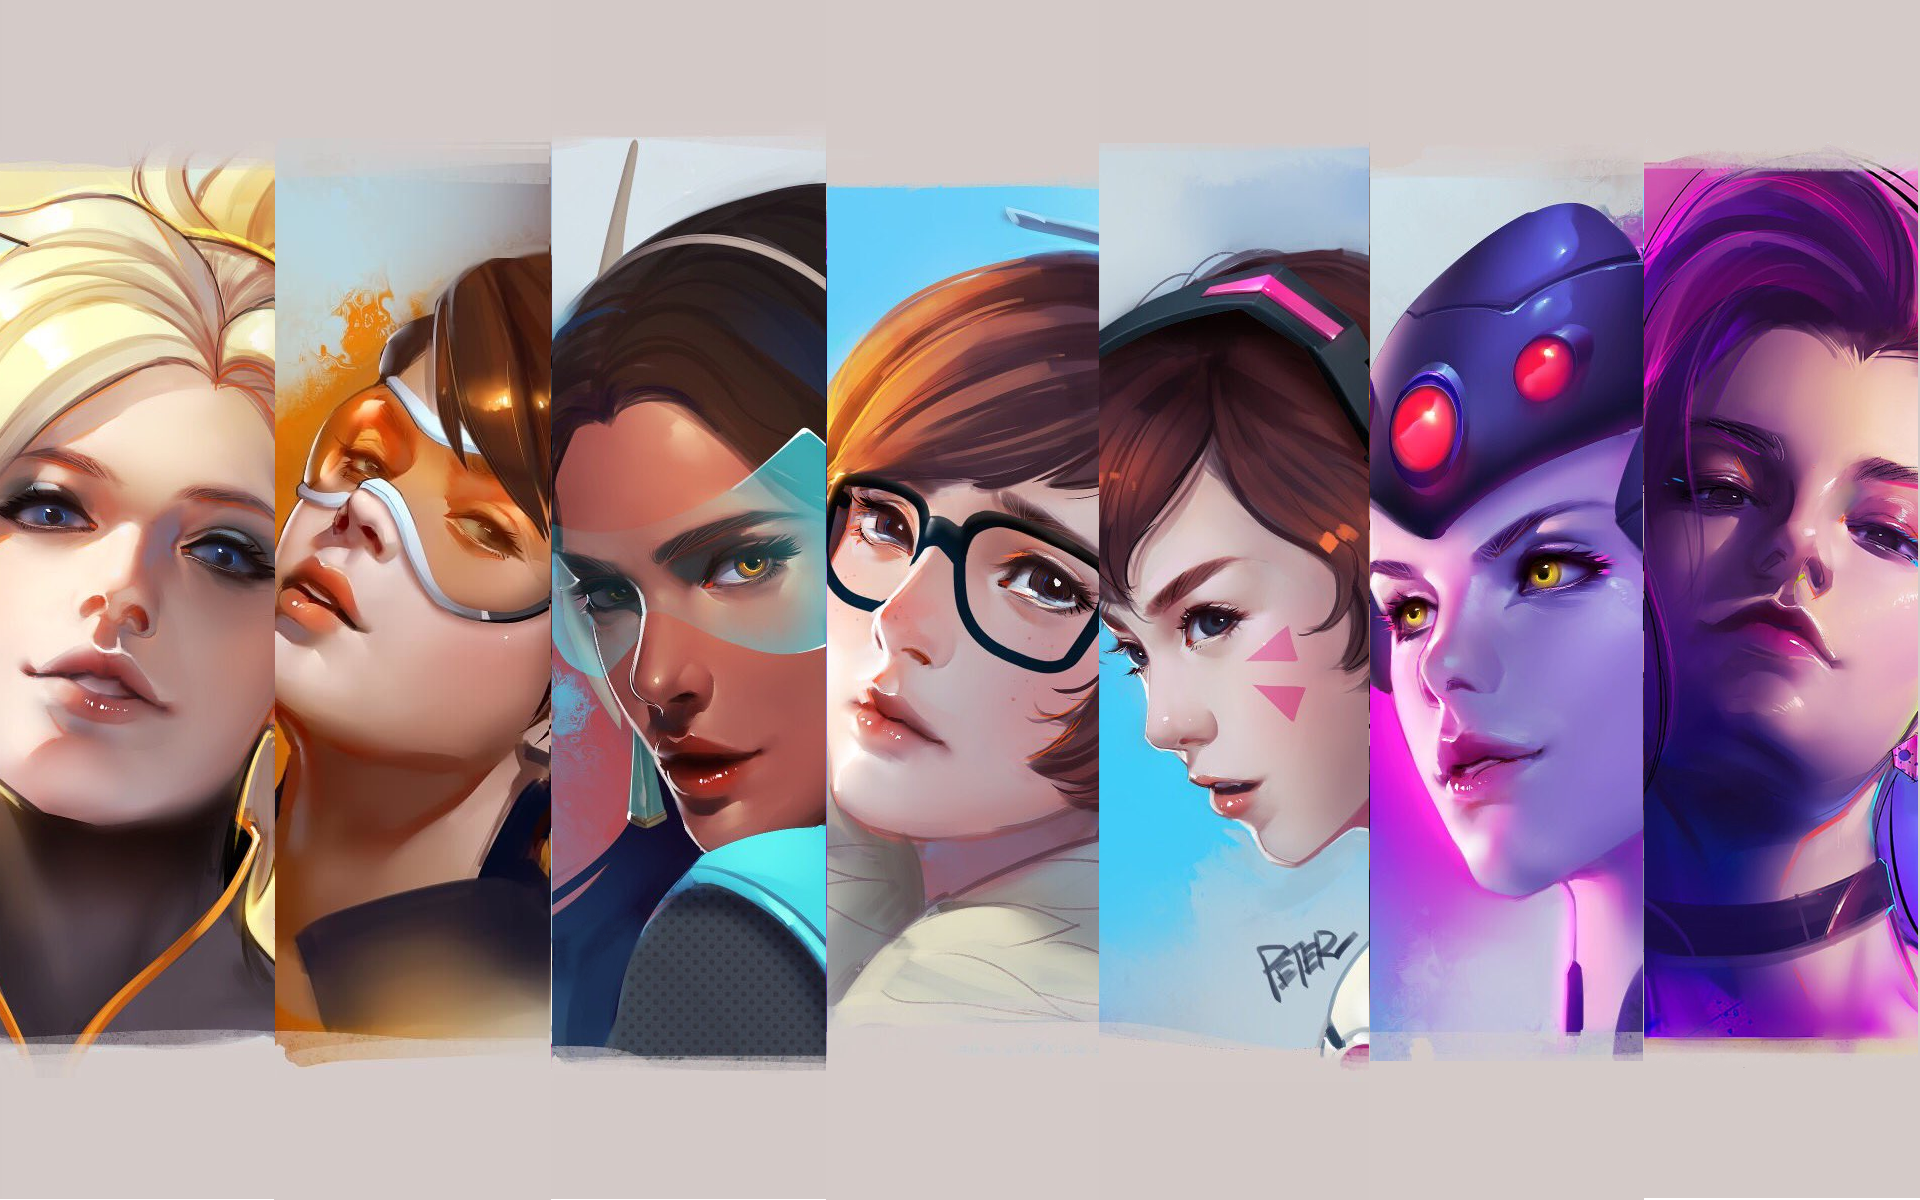 Symmetra widomaker and tracer